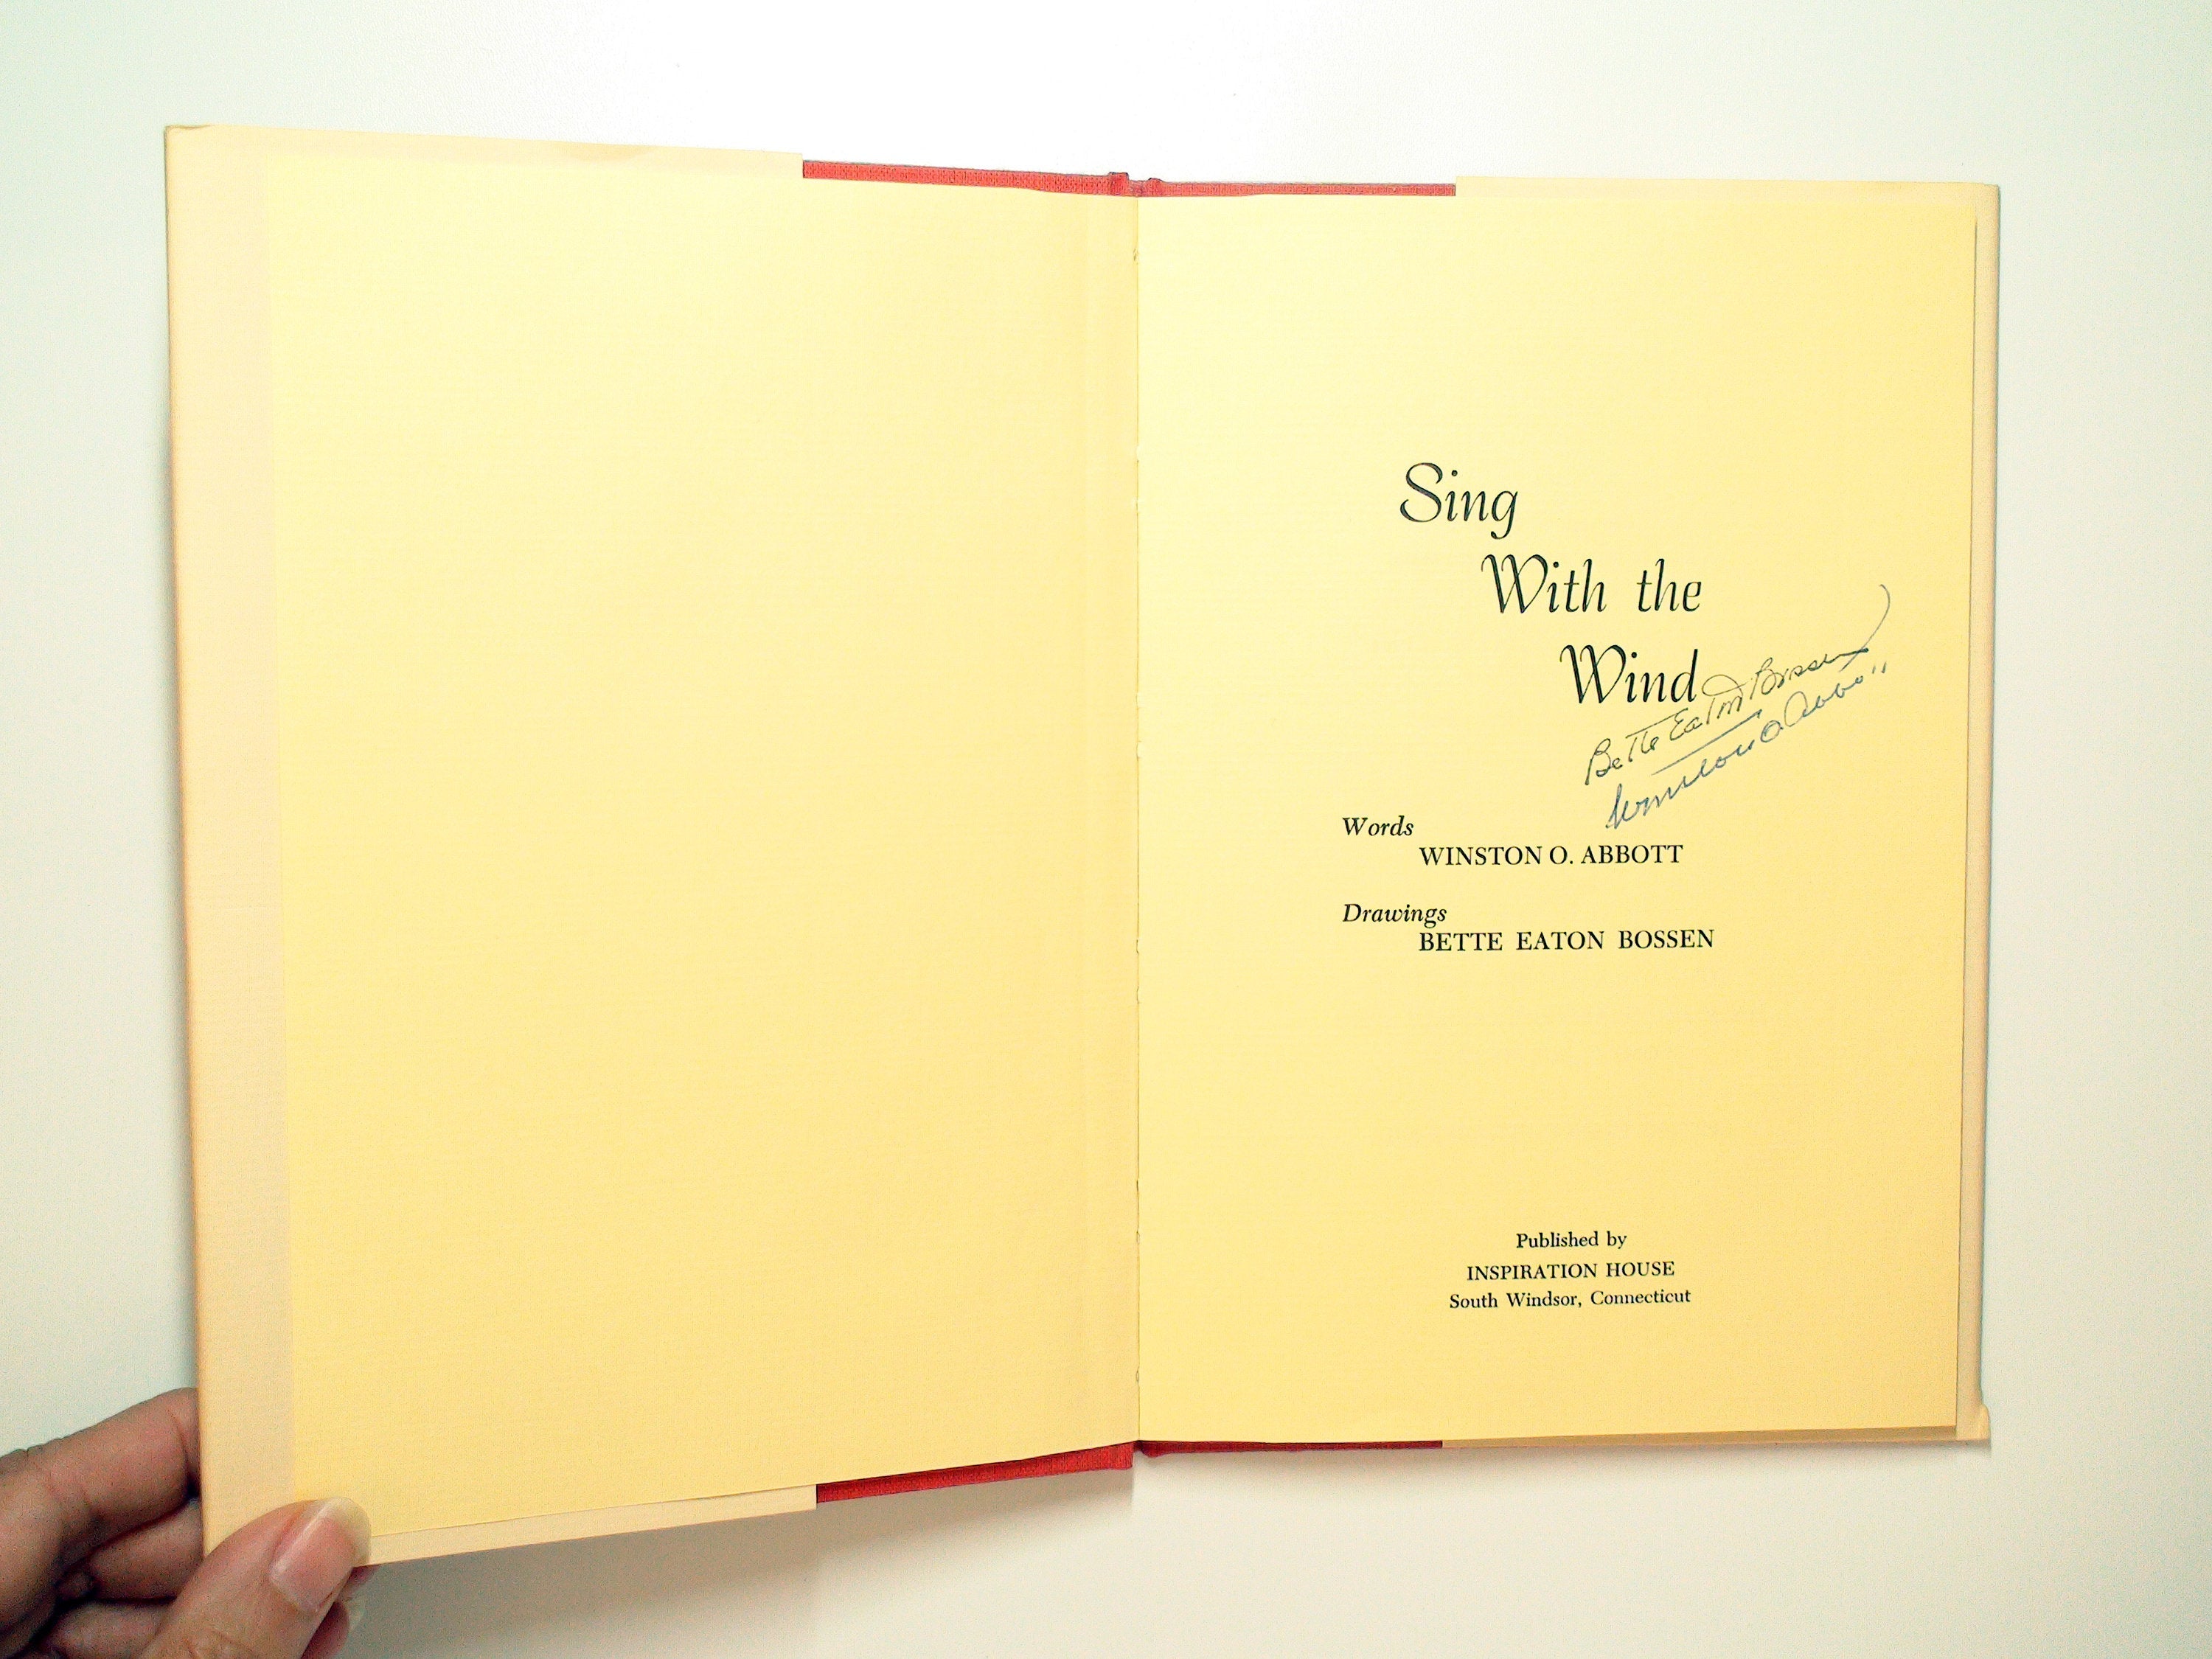 Sing with the Wind, SIGNED by Winston O. Abbot and Bette Eaton Bossen, 1985